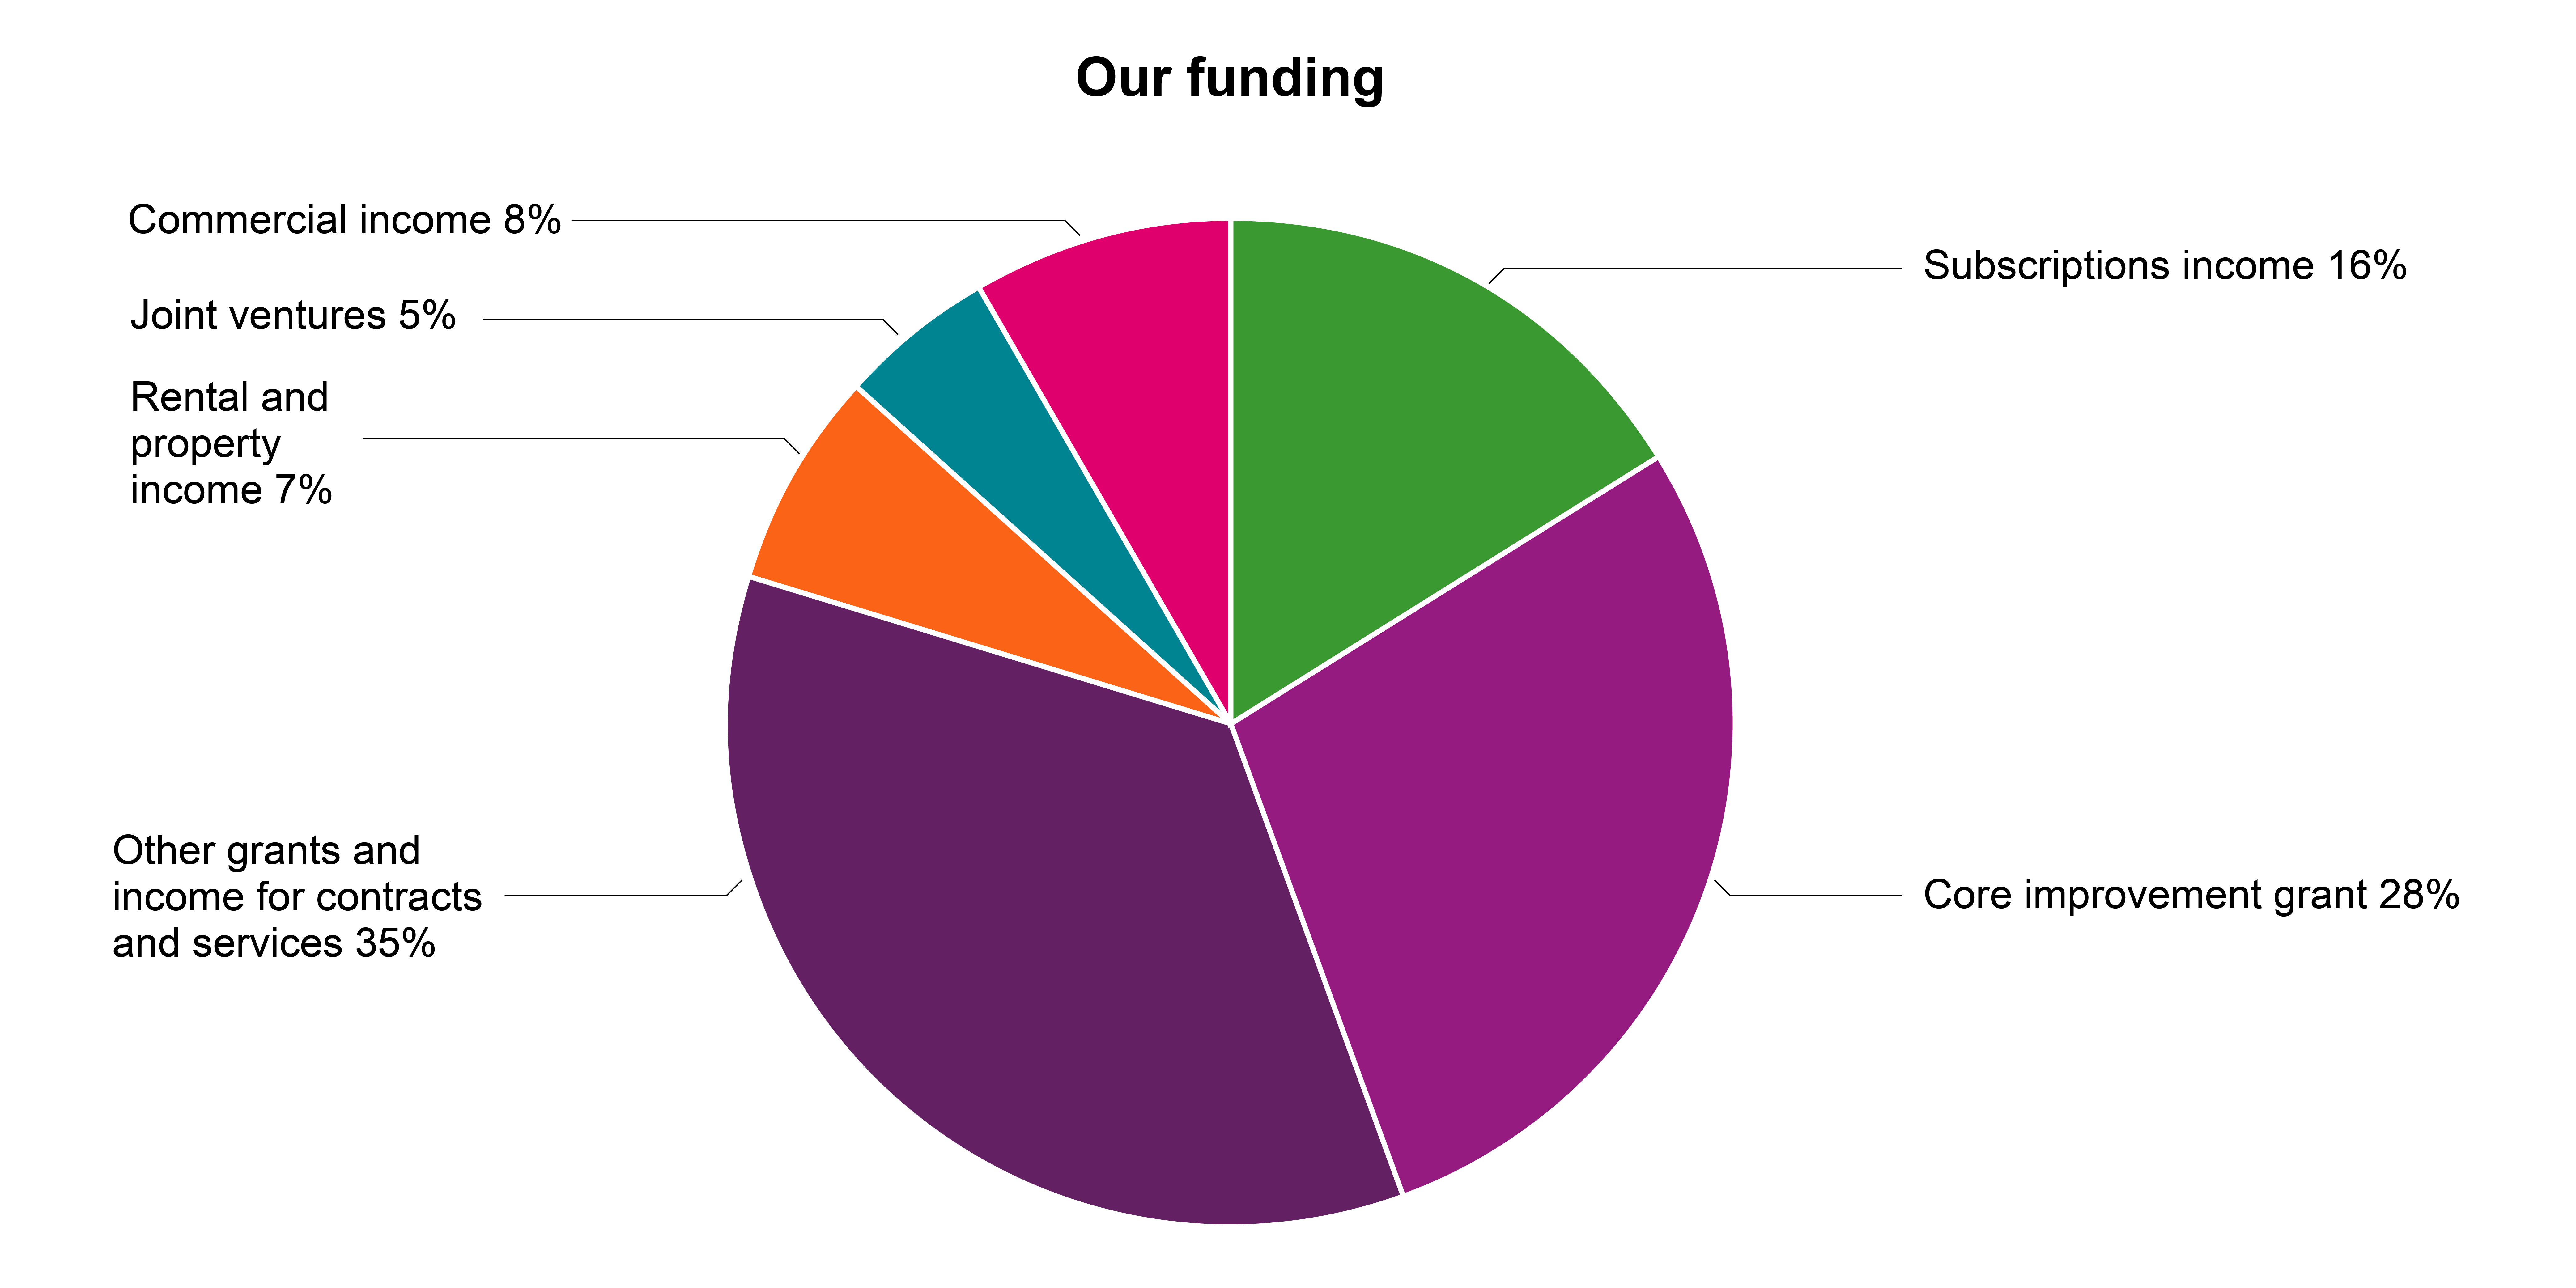 A pie chart showing the LGA's funding